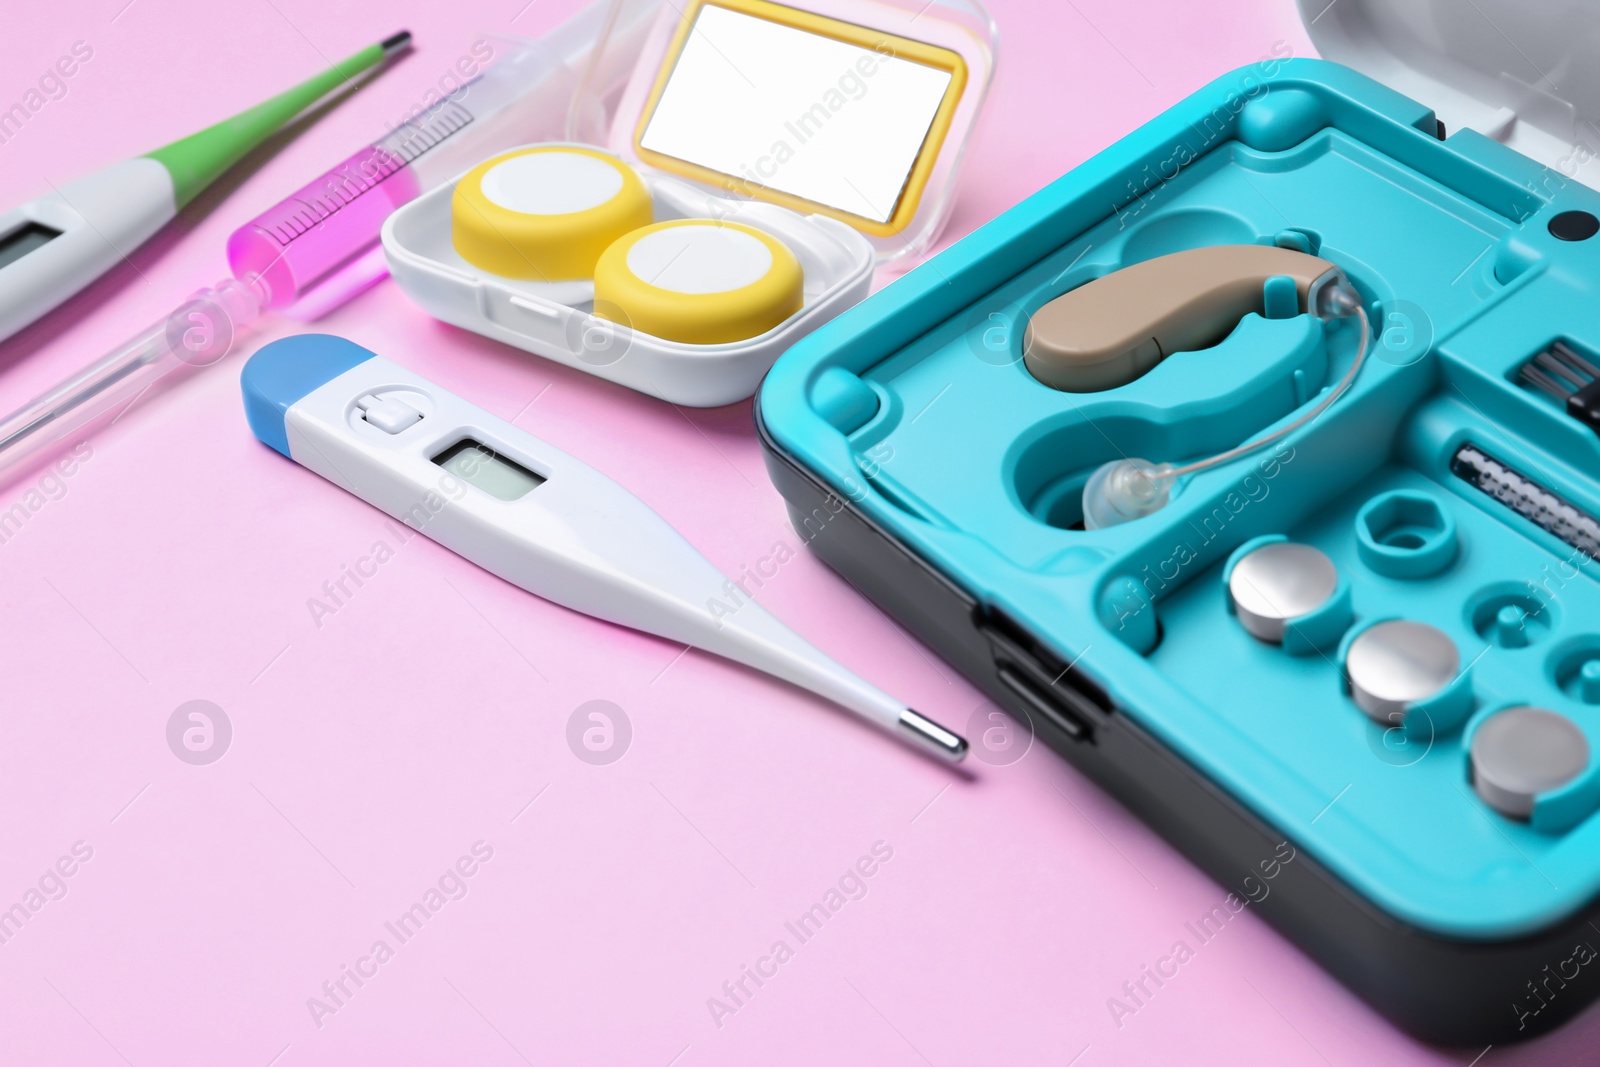 Photo of Hearing aid and medical objects on color background